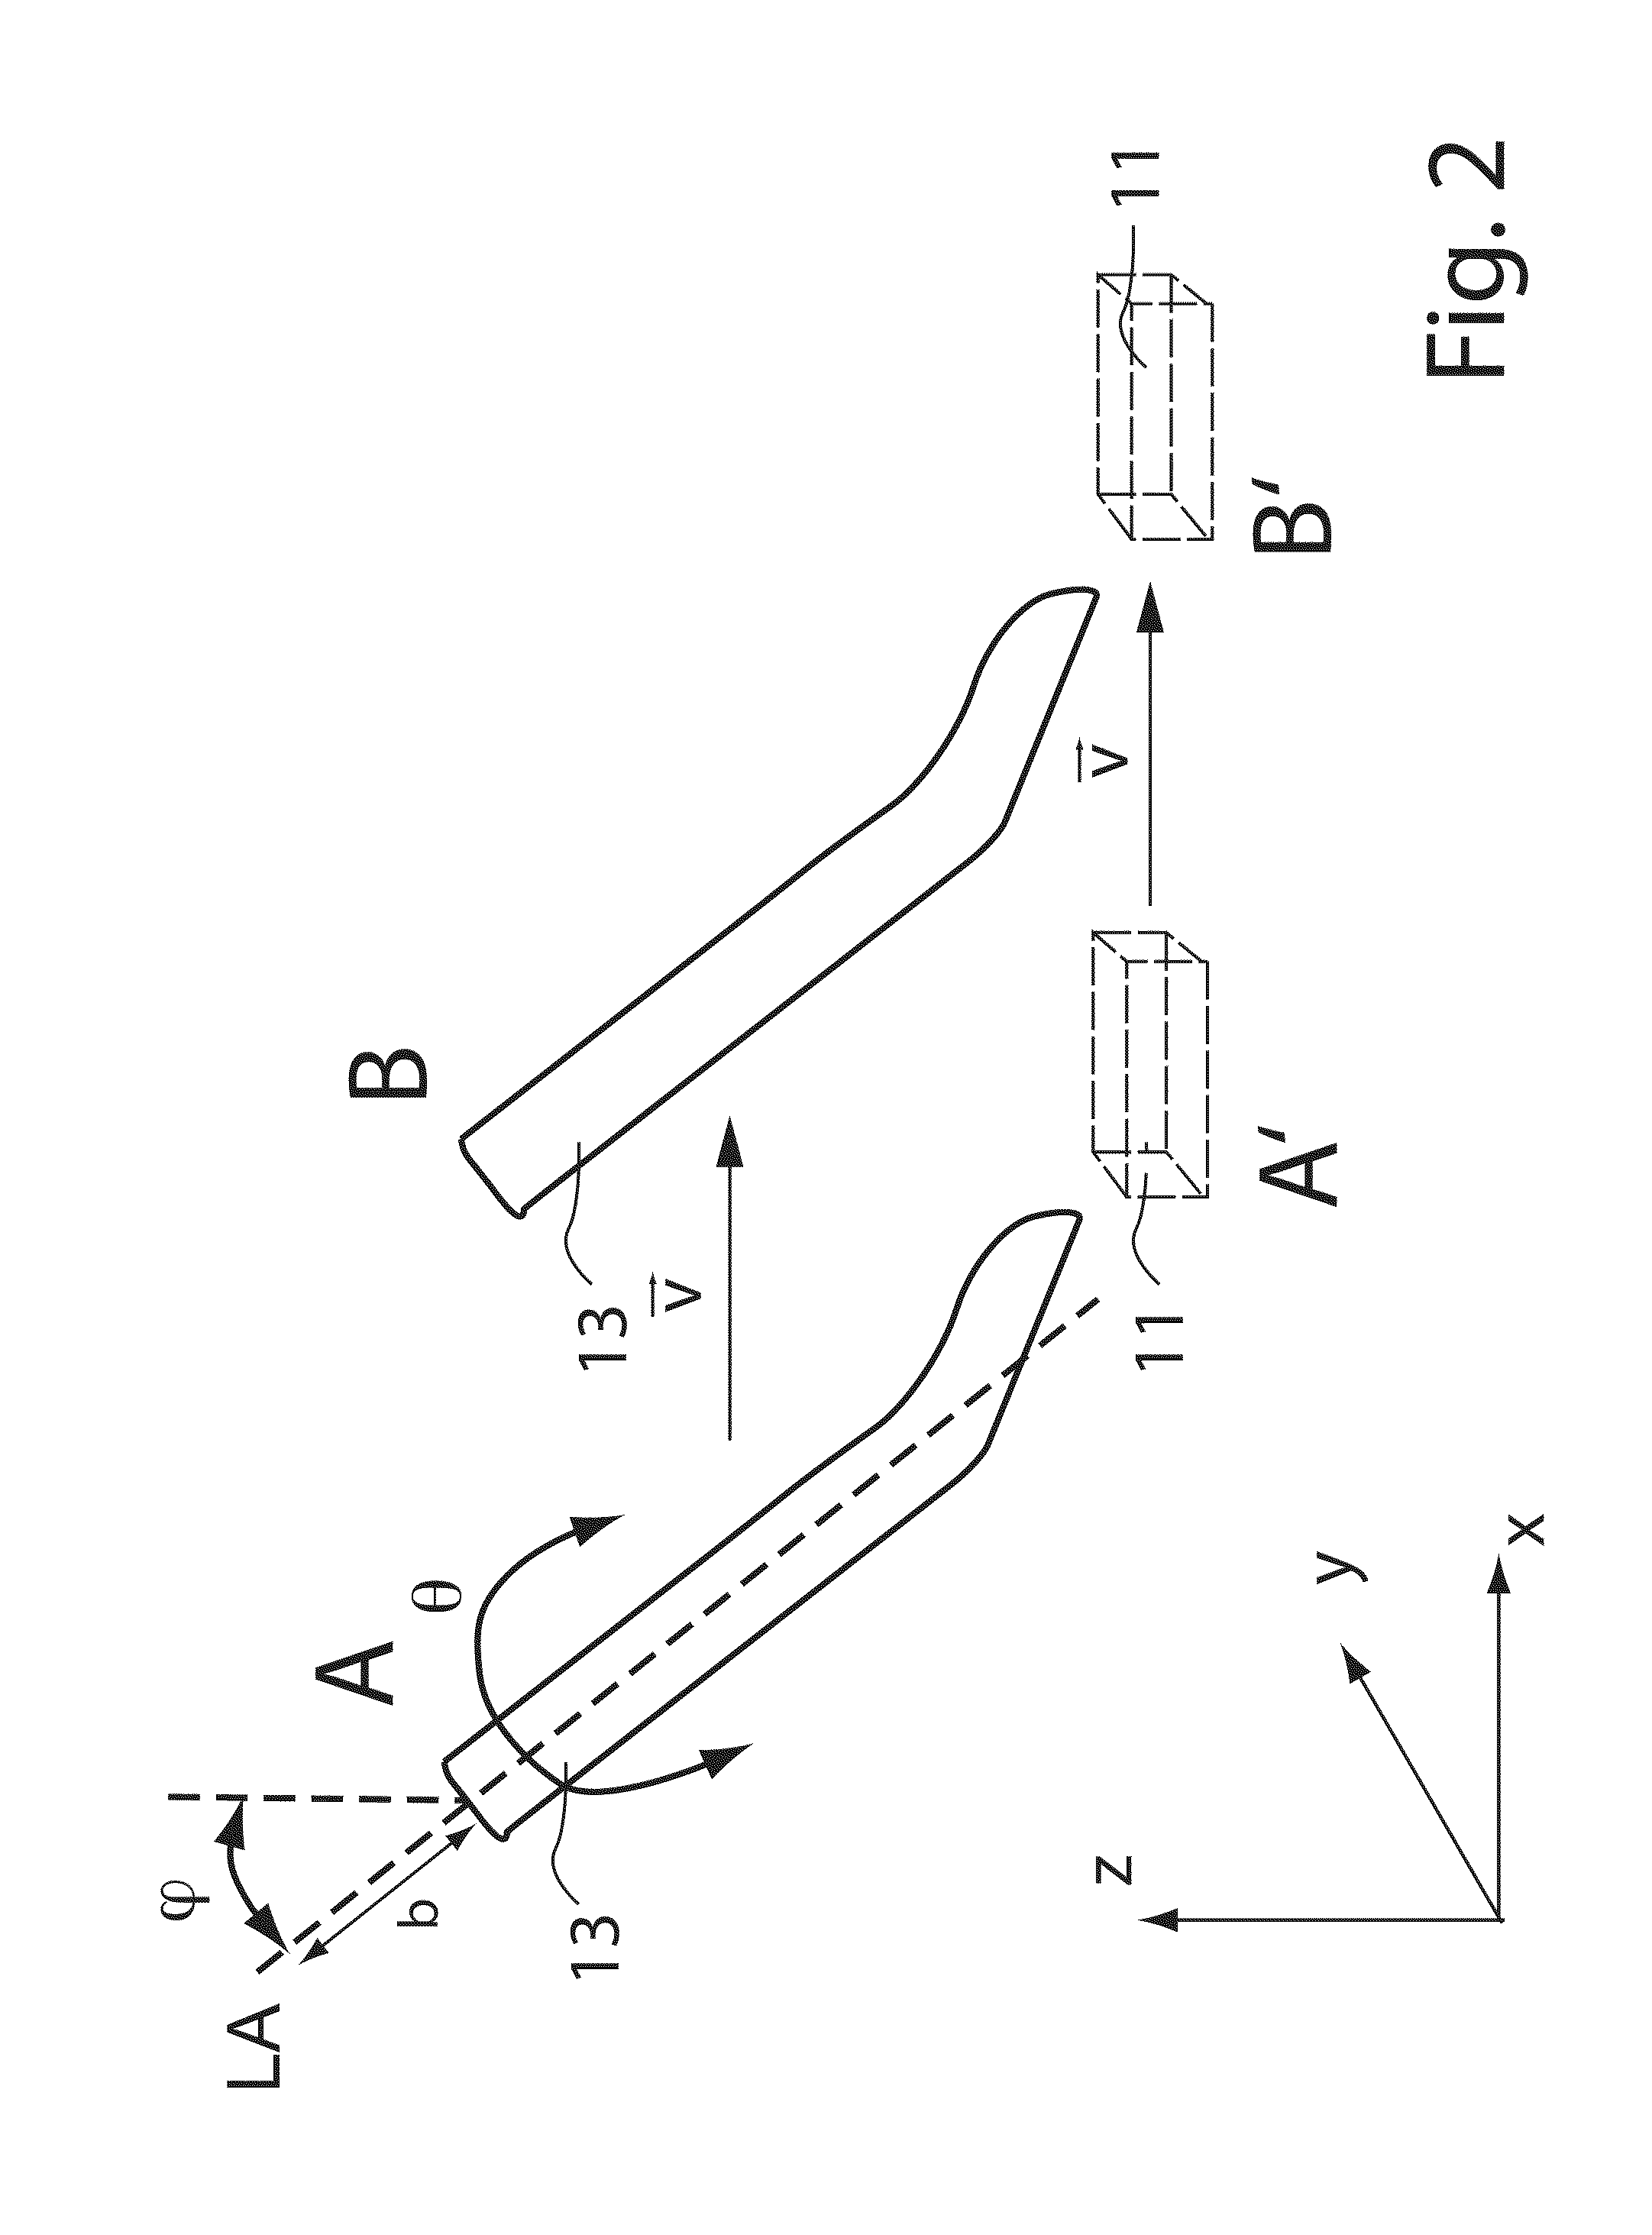 System and Method for Visualizing Objects